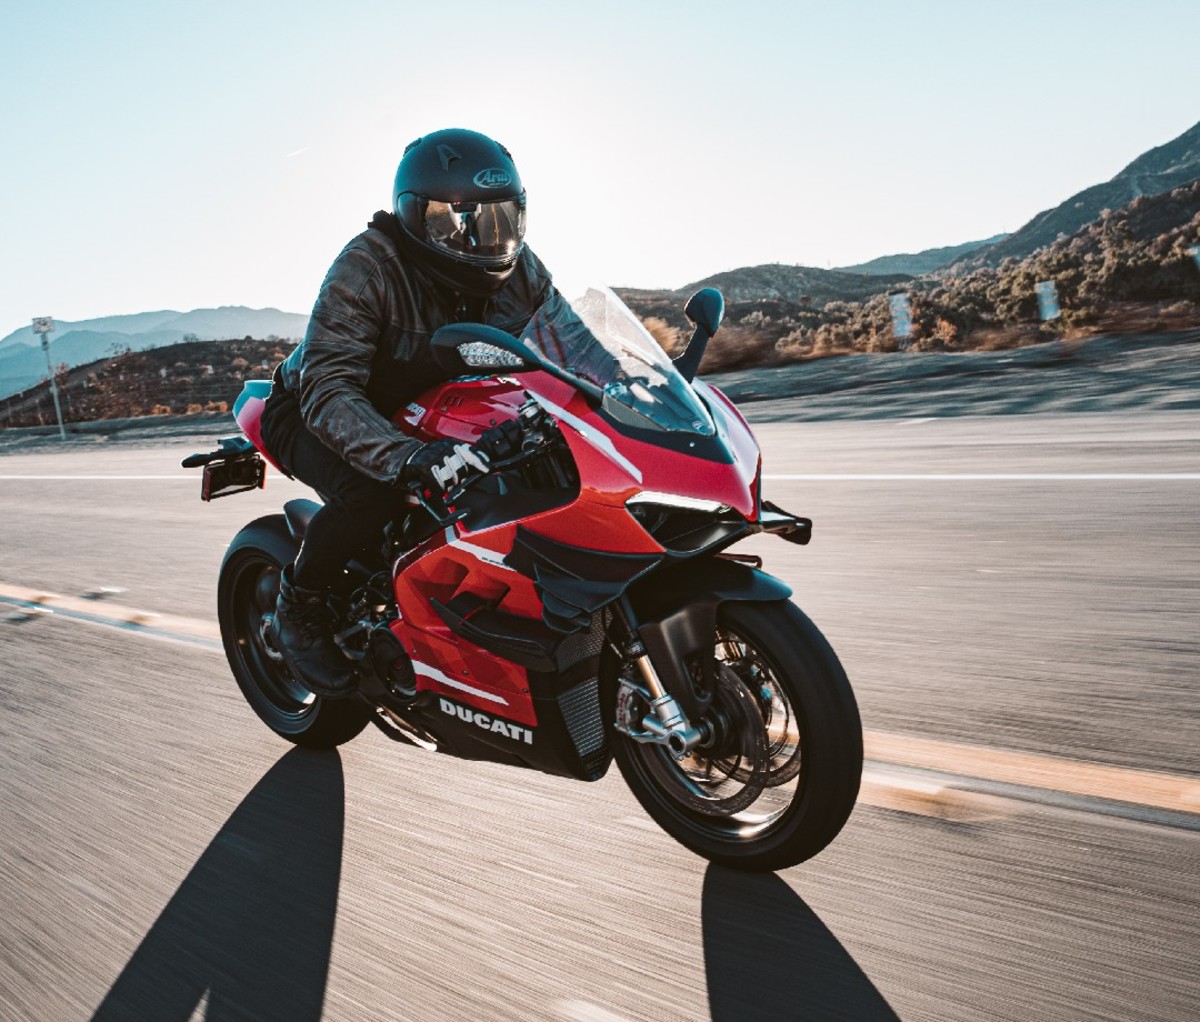 Side view of a rider on a red 2021 Ducati Superleggera V4 motorcycle on a flat two lane highway